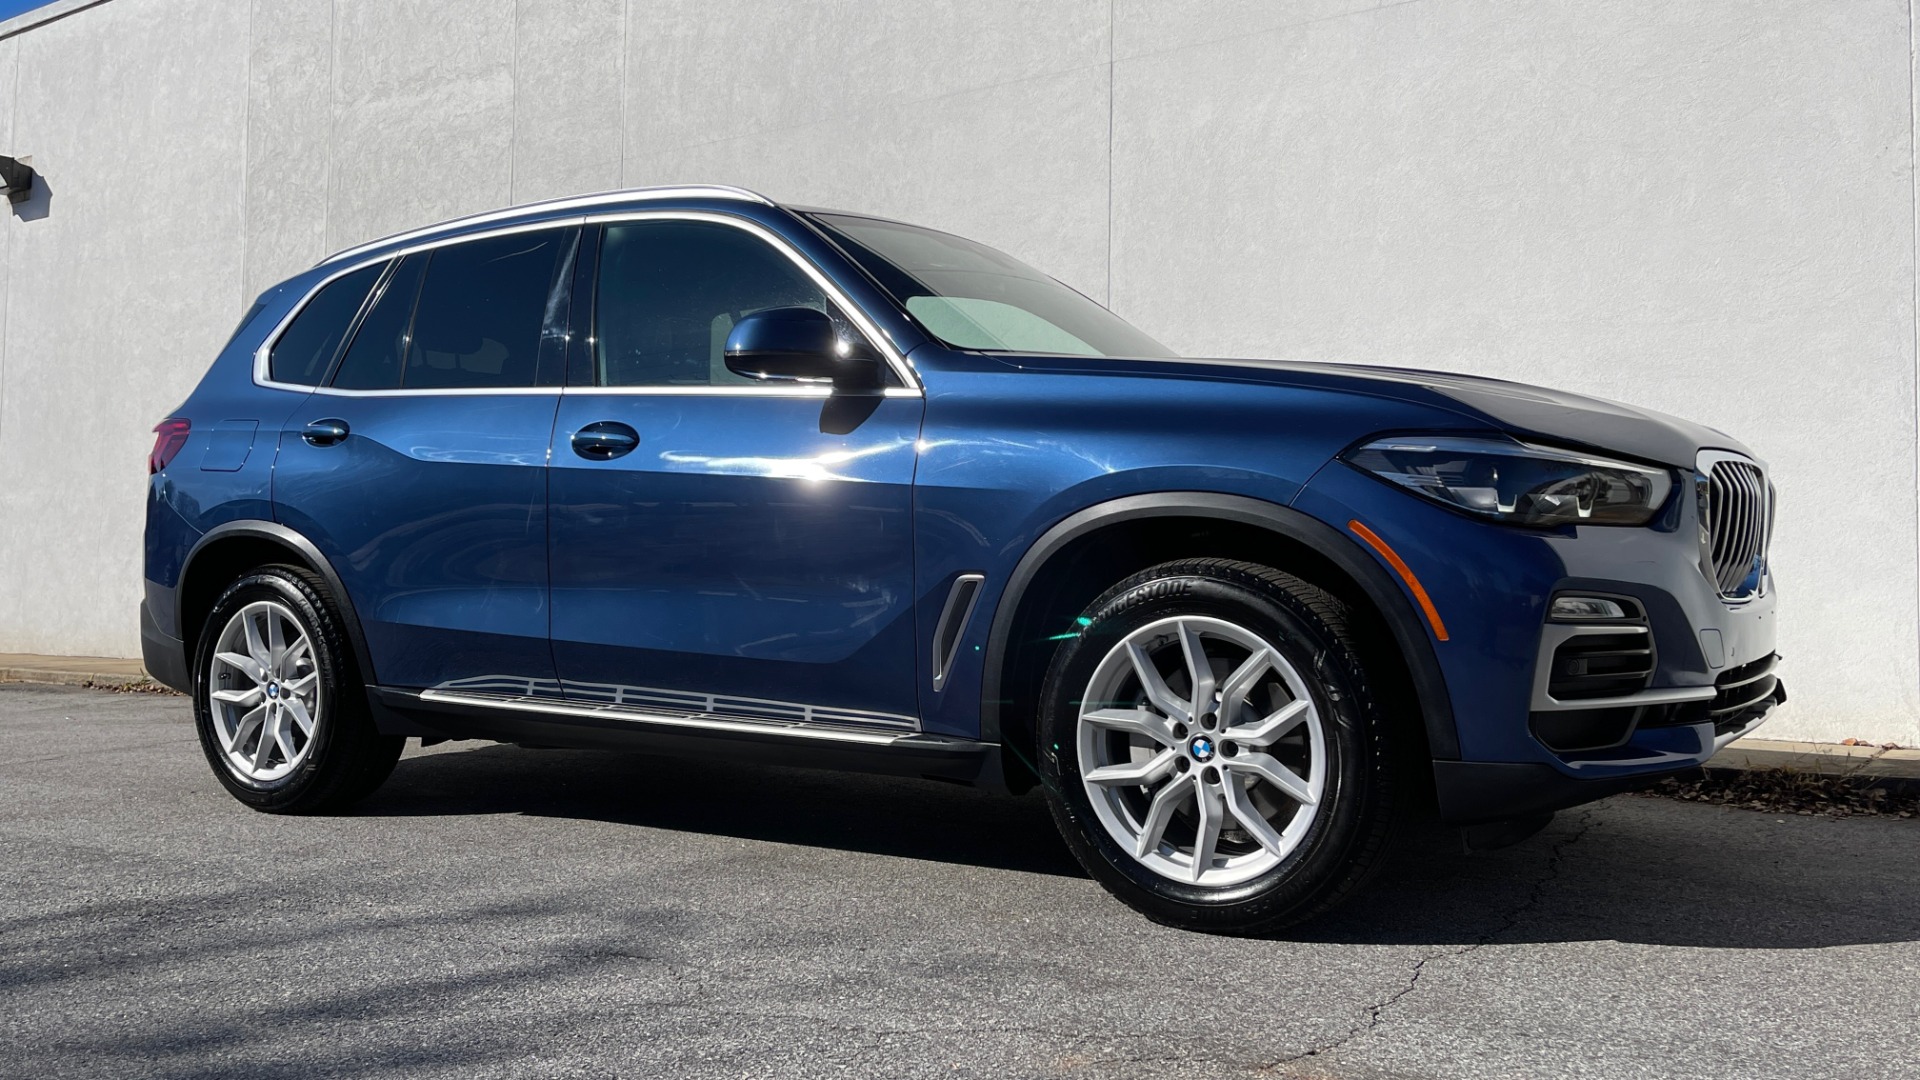 Used 2019 BMW X5 XDRIVE40I / CONVENIENCE PKG / REMOTE START / TOWING / H/K SND / REARVIEW for sale $57,395 at Formula Imports in Charlotte NC 28227 5